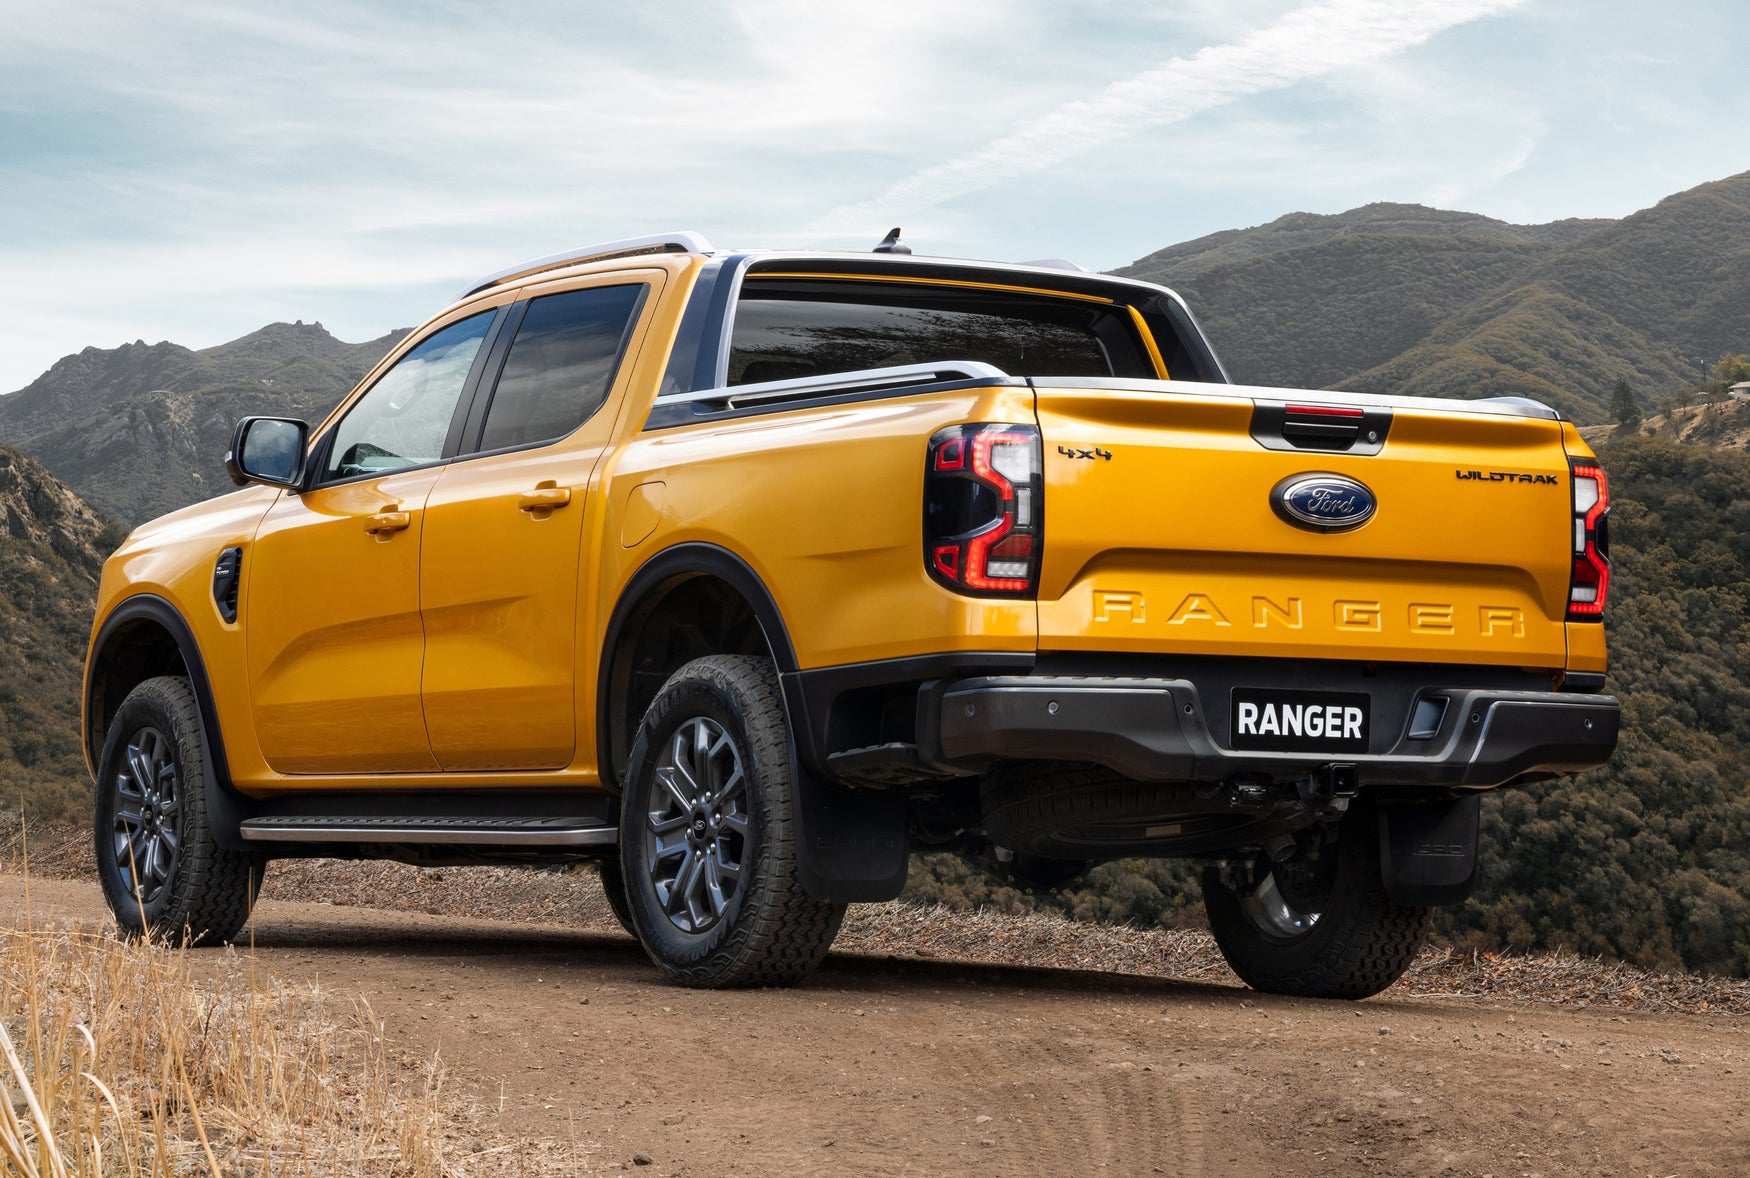 New 2022 Ford Ranger rear side view